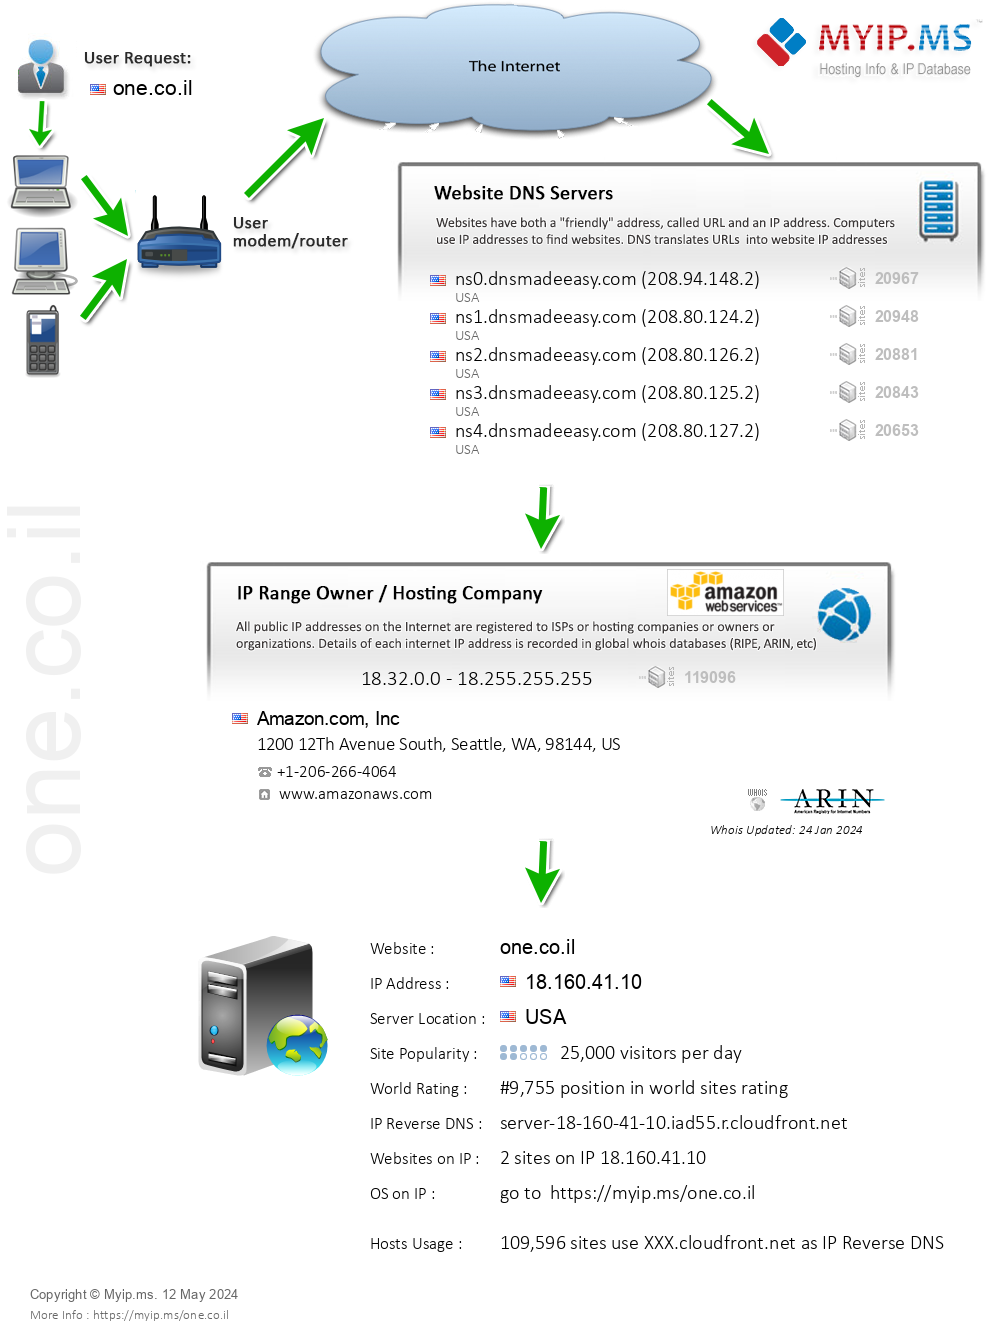 One.co.il - Website Hosting Visual IP Diagram